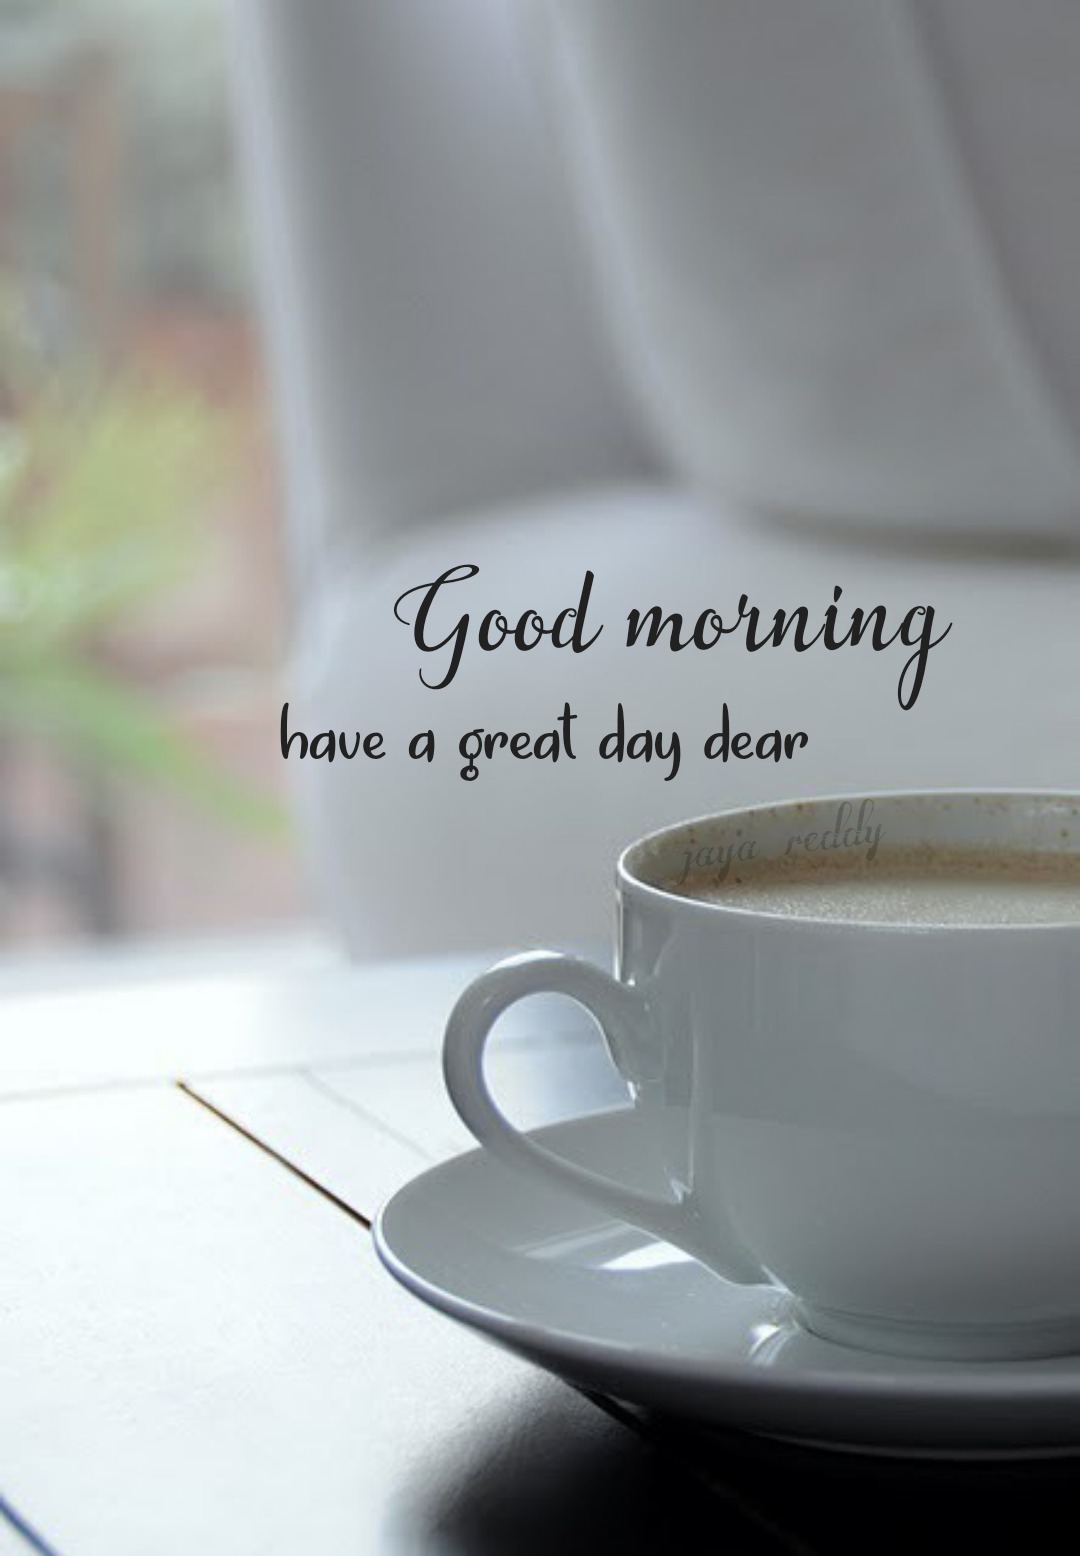 Have A Great Day Dear - DesiComments.com